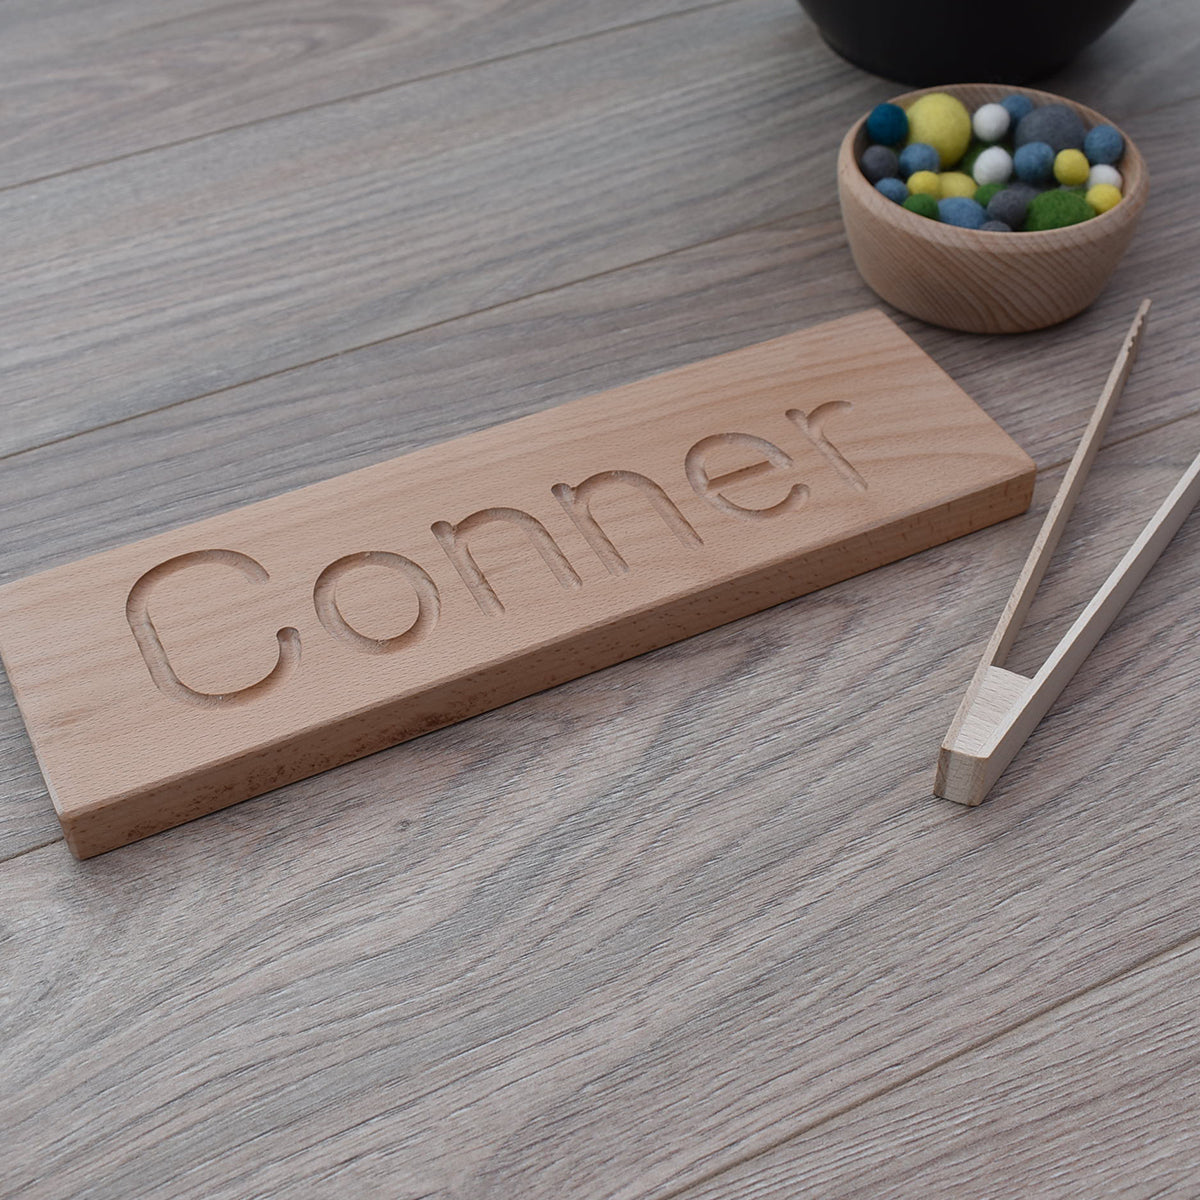 Connor DrawMe personalised wooden name board used for learning to write and fine motor skill sensory play